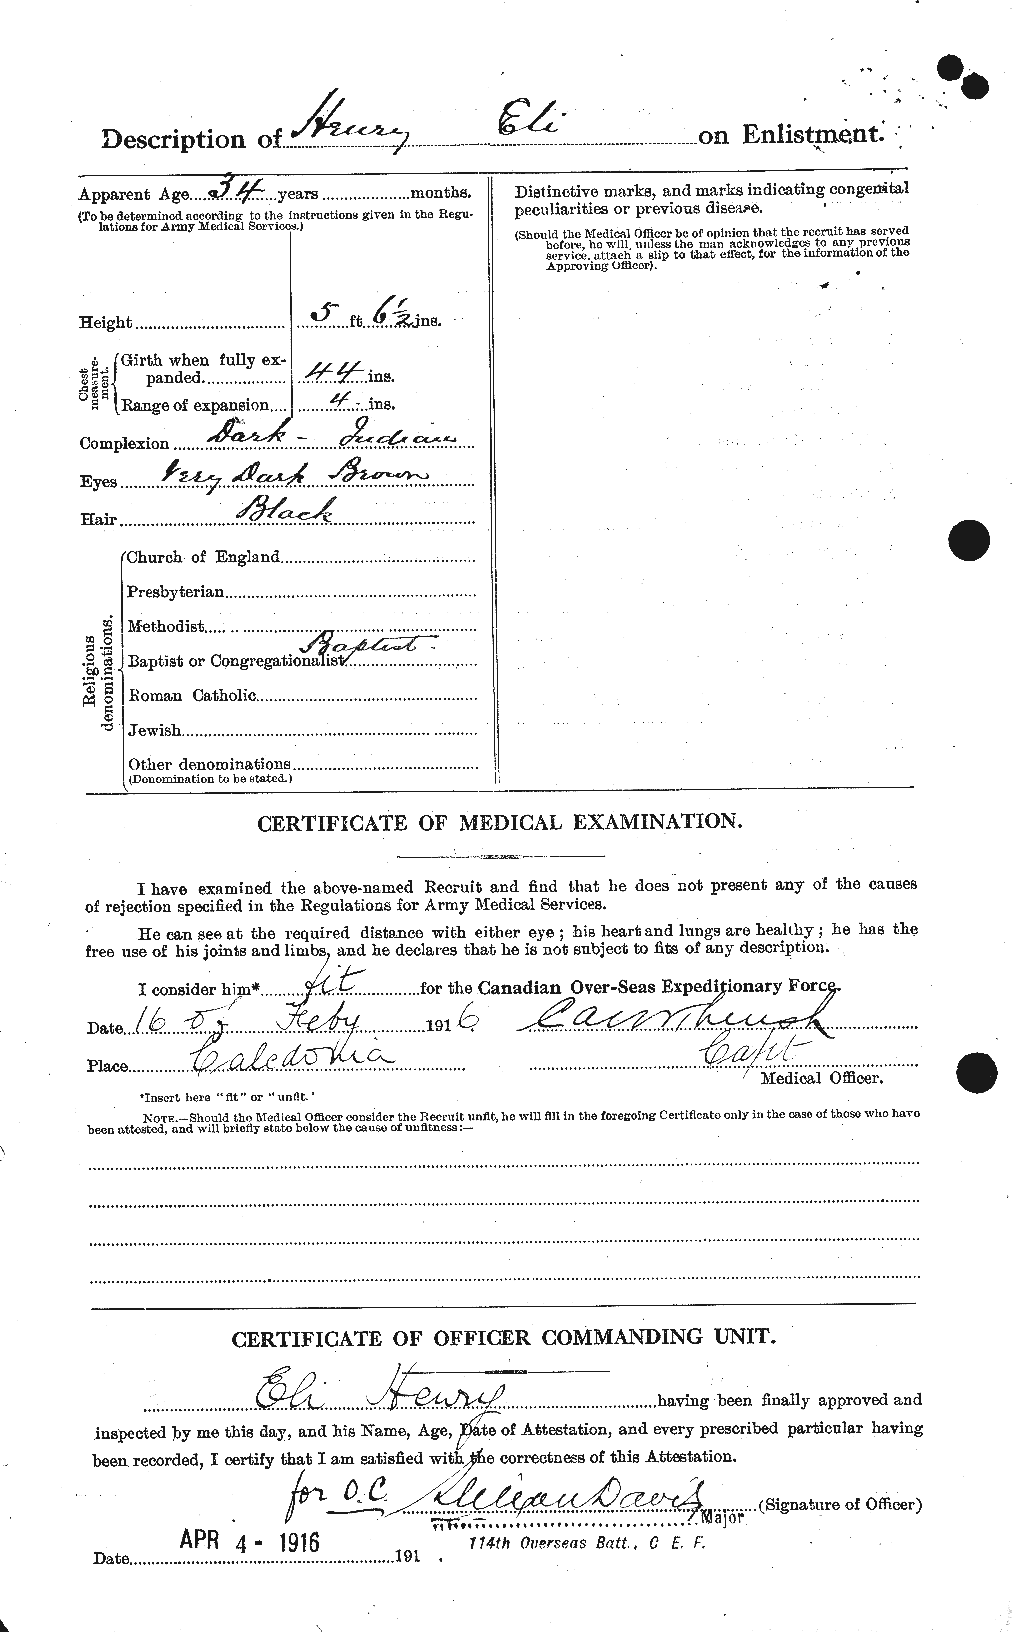 Personnel Records of the First World War - CEF 392842b